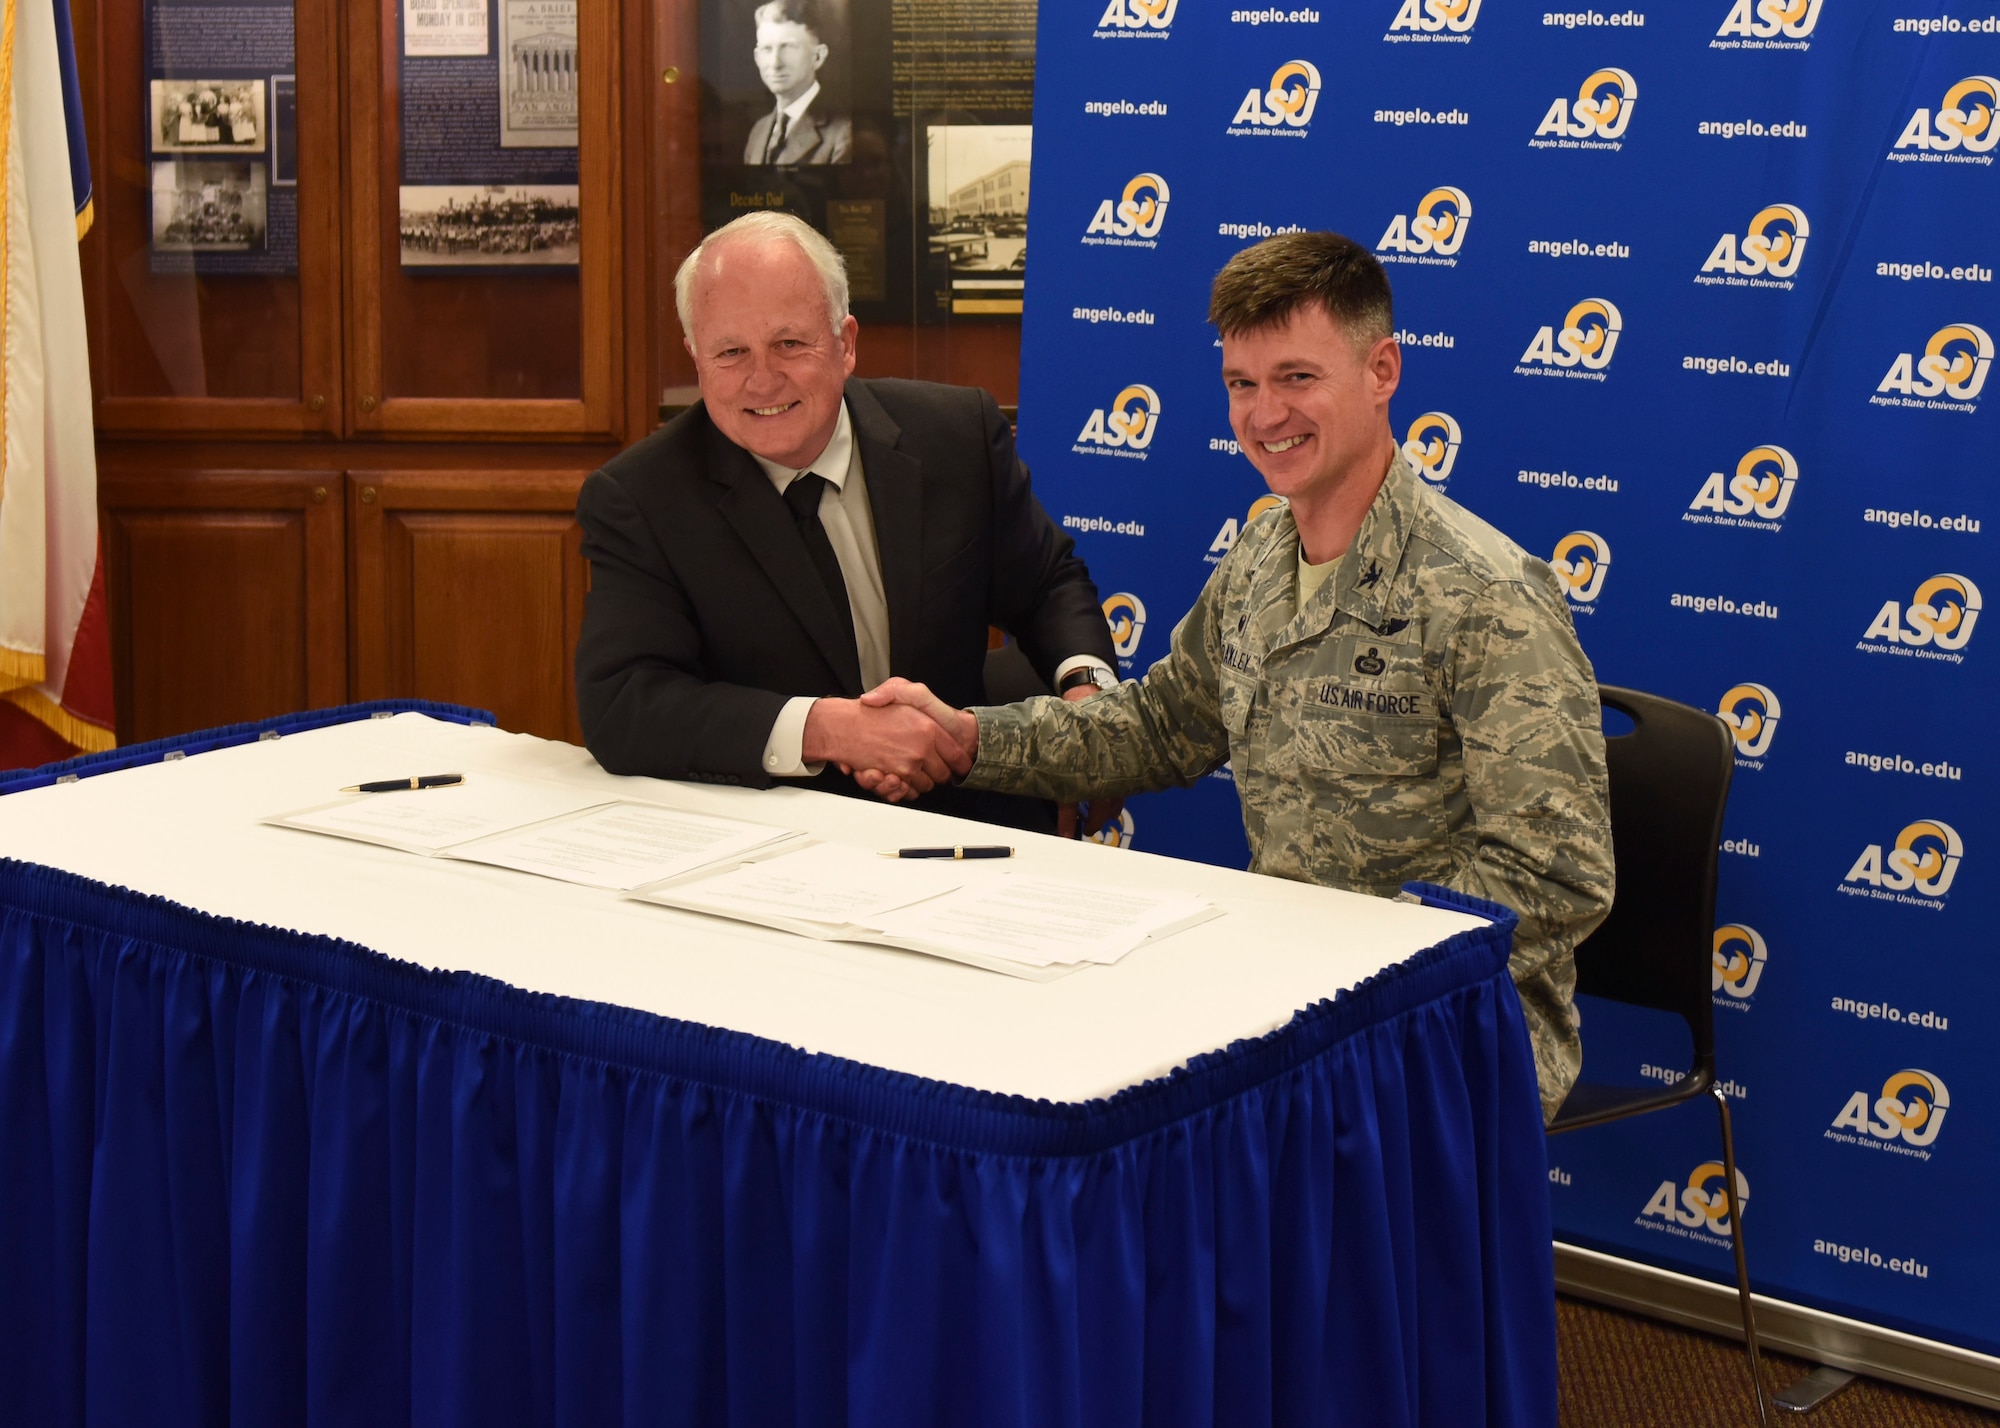 Angelo State University President, Dr. Brian May and U.S. Air Force Col. Thomas Coakley, 17th Training Group commander, shake hands after signing the Memorandum of Understanding at ASU, Texas, April 15, 2019. The MOU allows 14N professionals to transfer 12 credit hours toward two master’s degree through Angelo State University (U.S. Air Force photo by Airman 1st Class Zachary Chapman/Released)